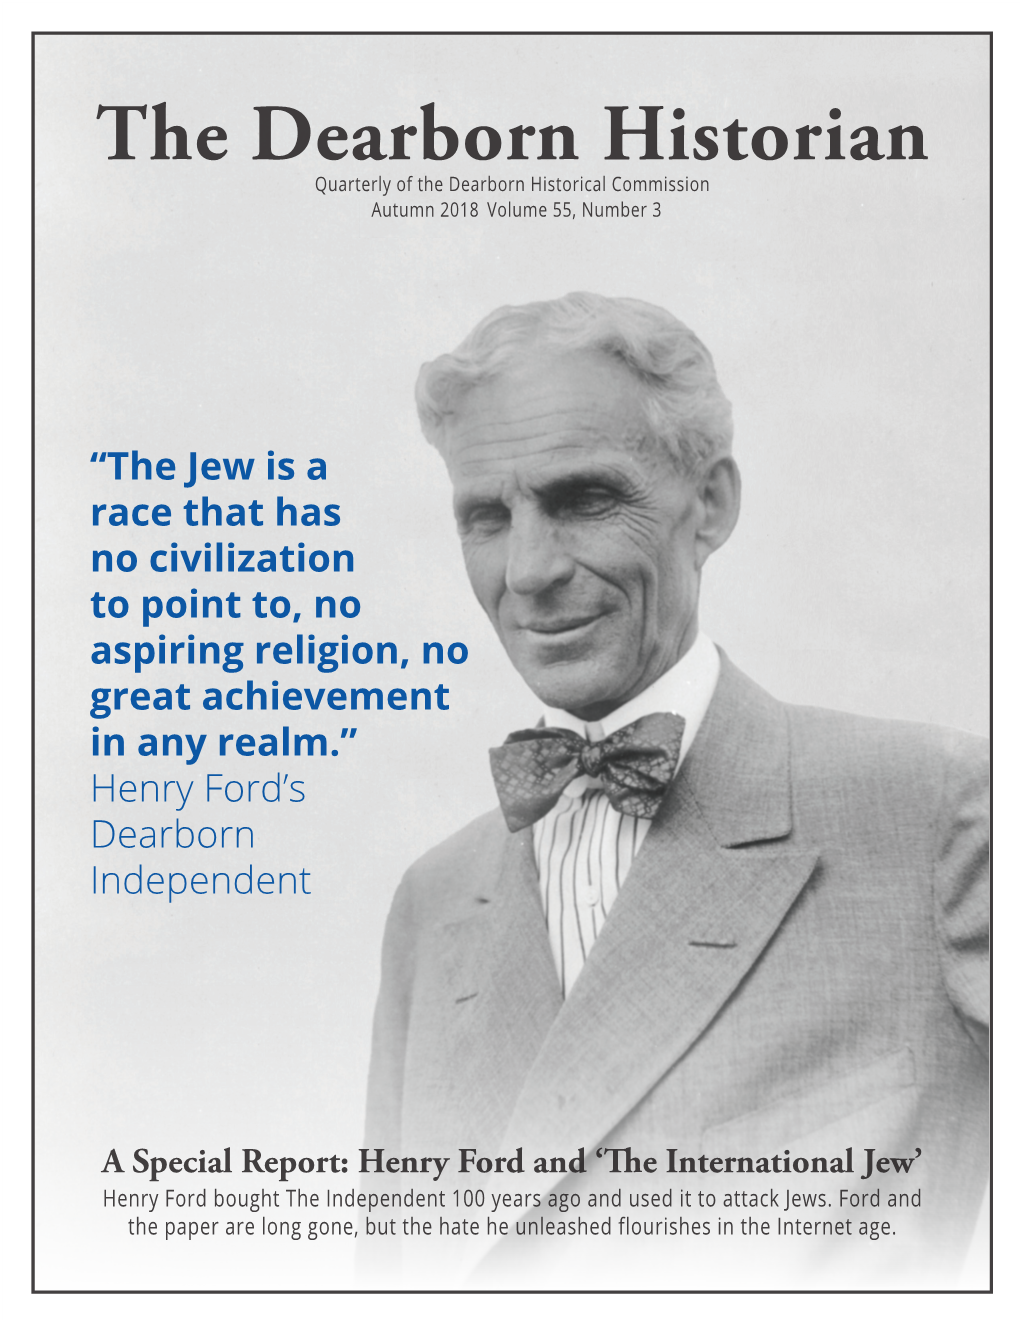 Henry Ford and 'The International Jew'